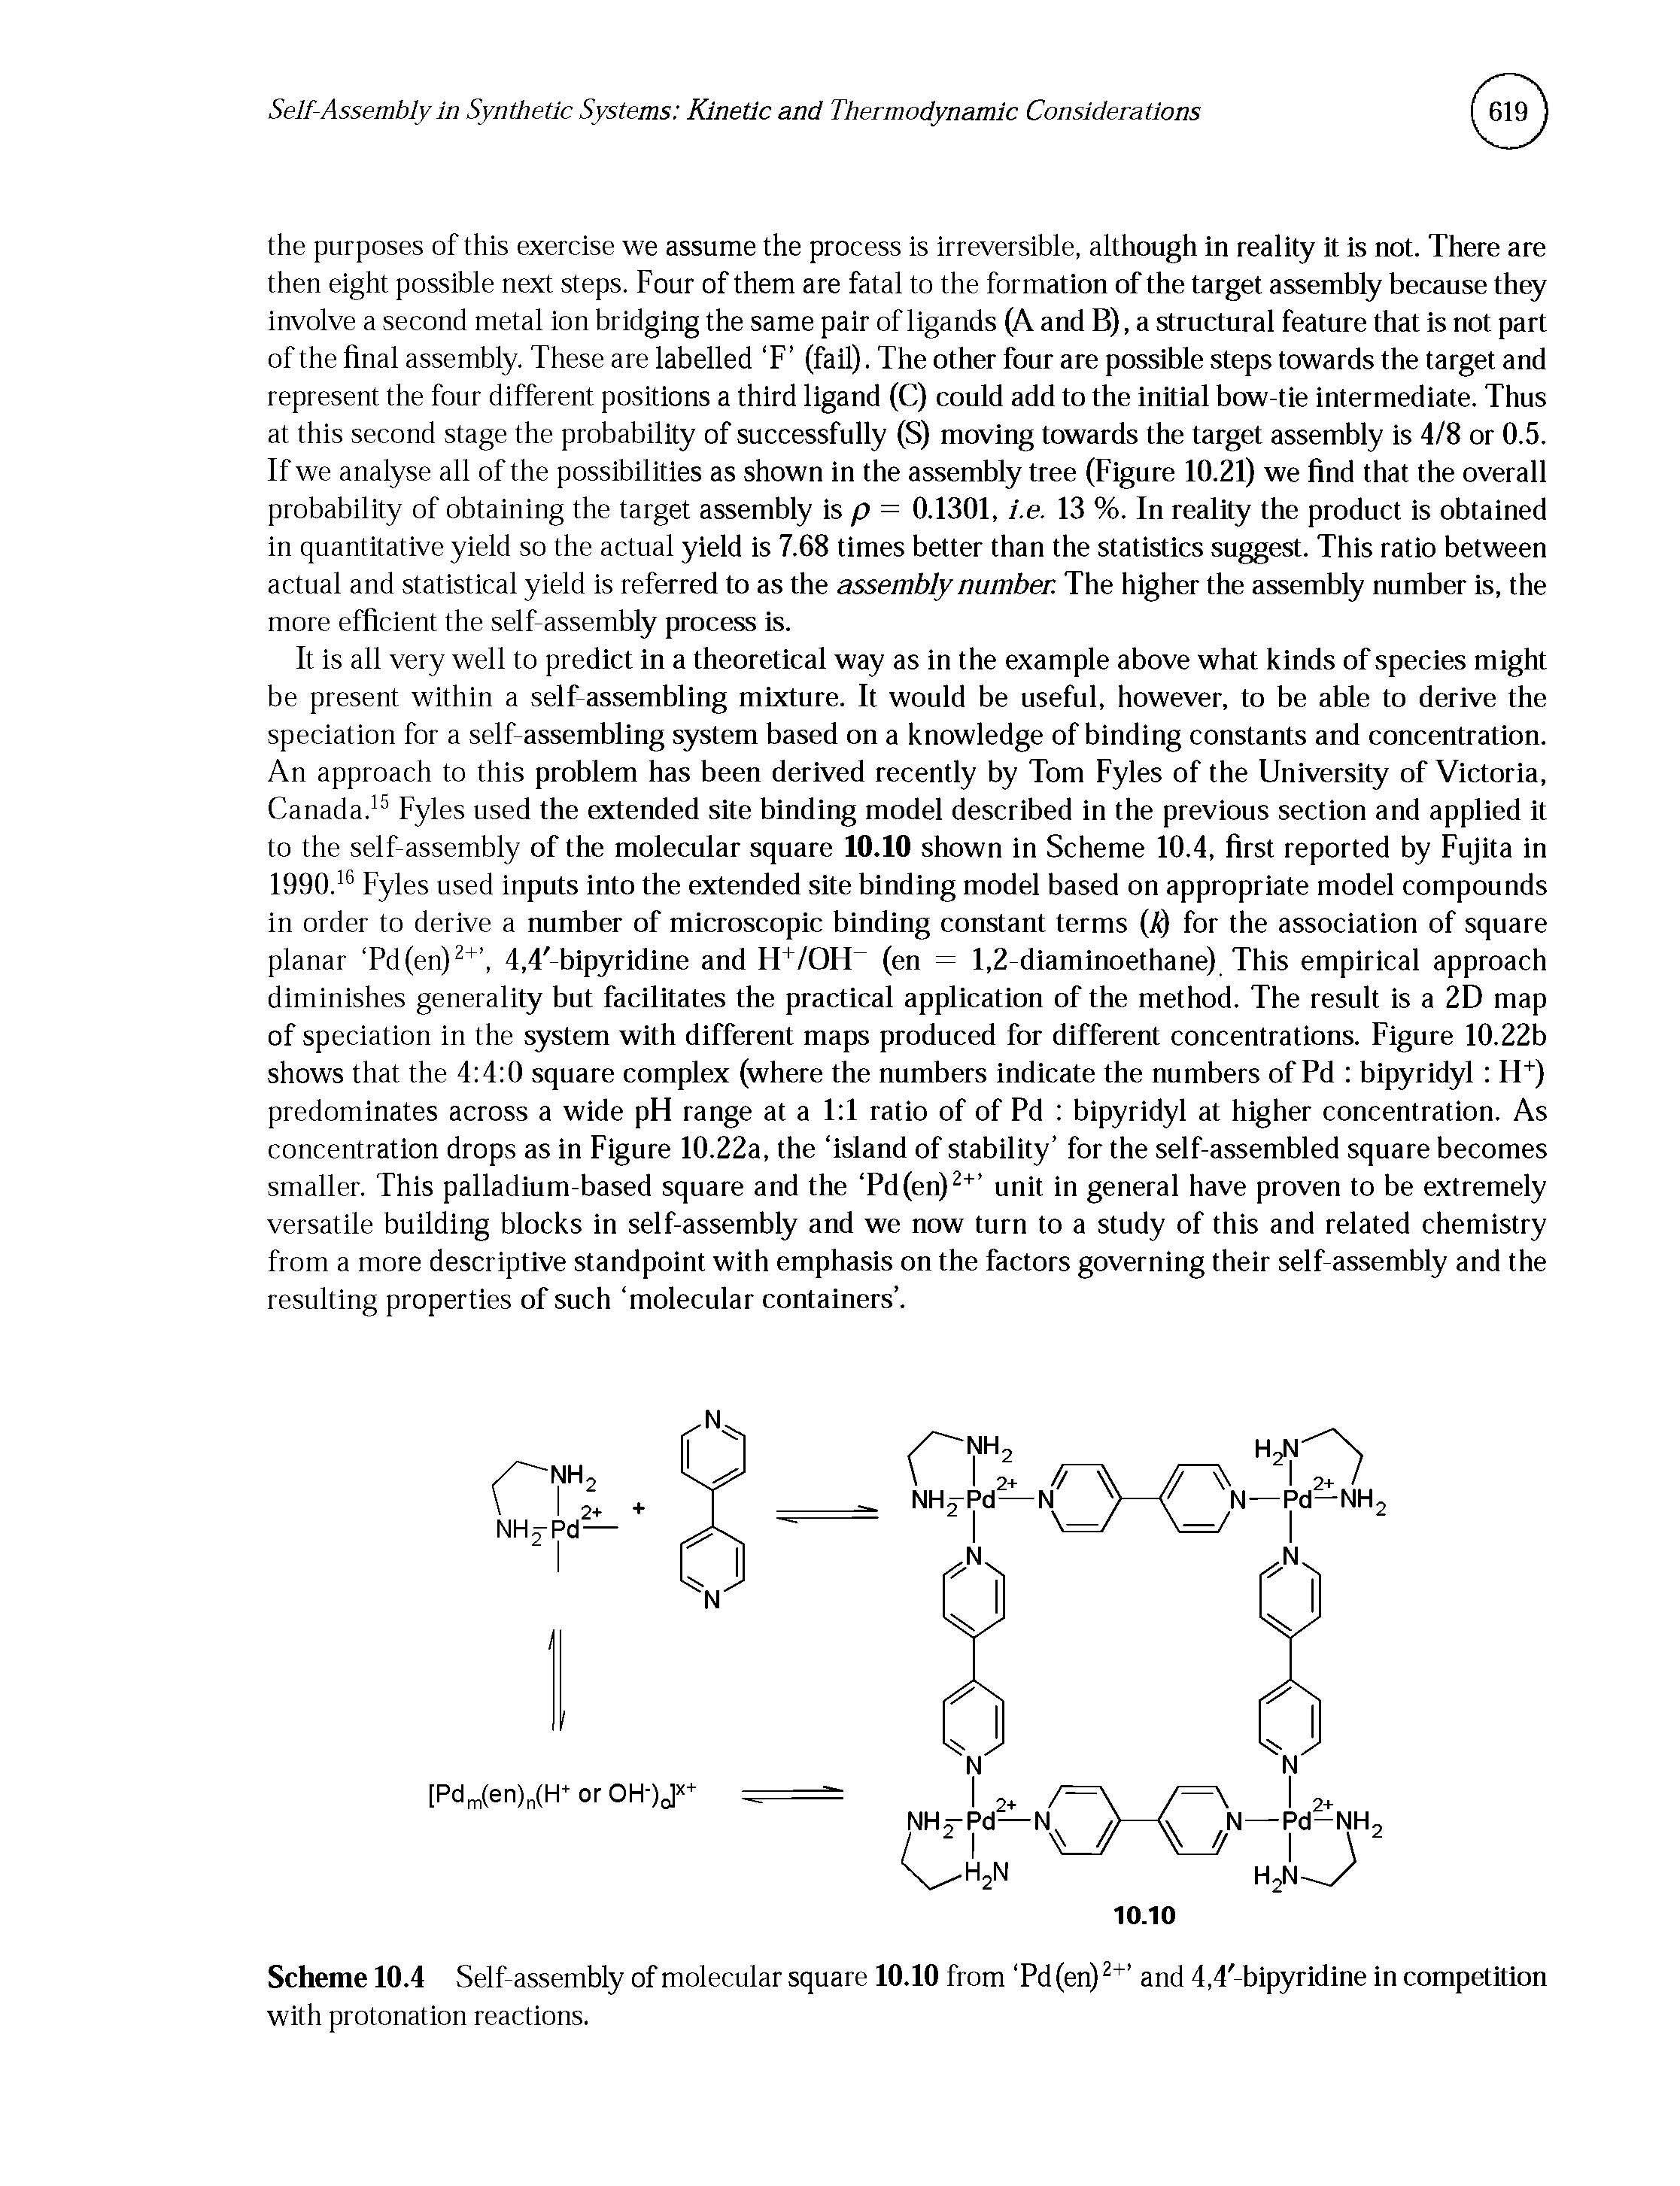 Scheme 10.4 Self-assembly of molecular square 10.10 from Pd (en)2+ and 4,4 bipyridine in competition with protonation reactions.